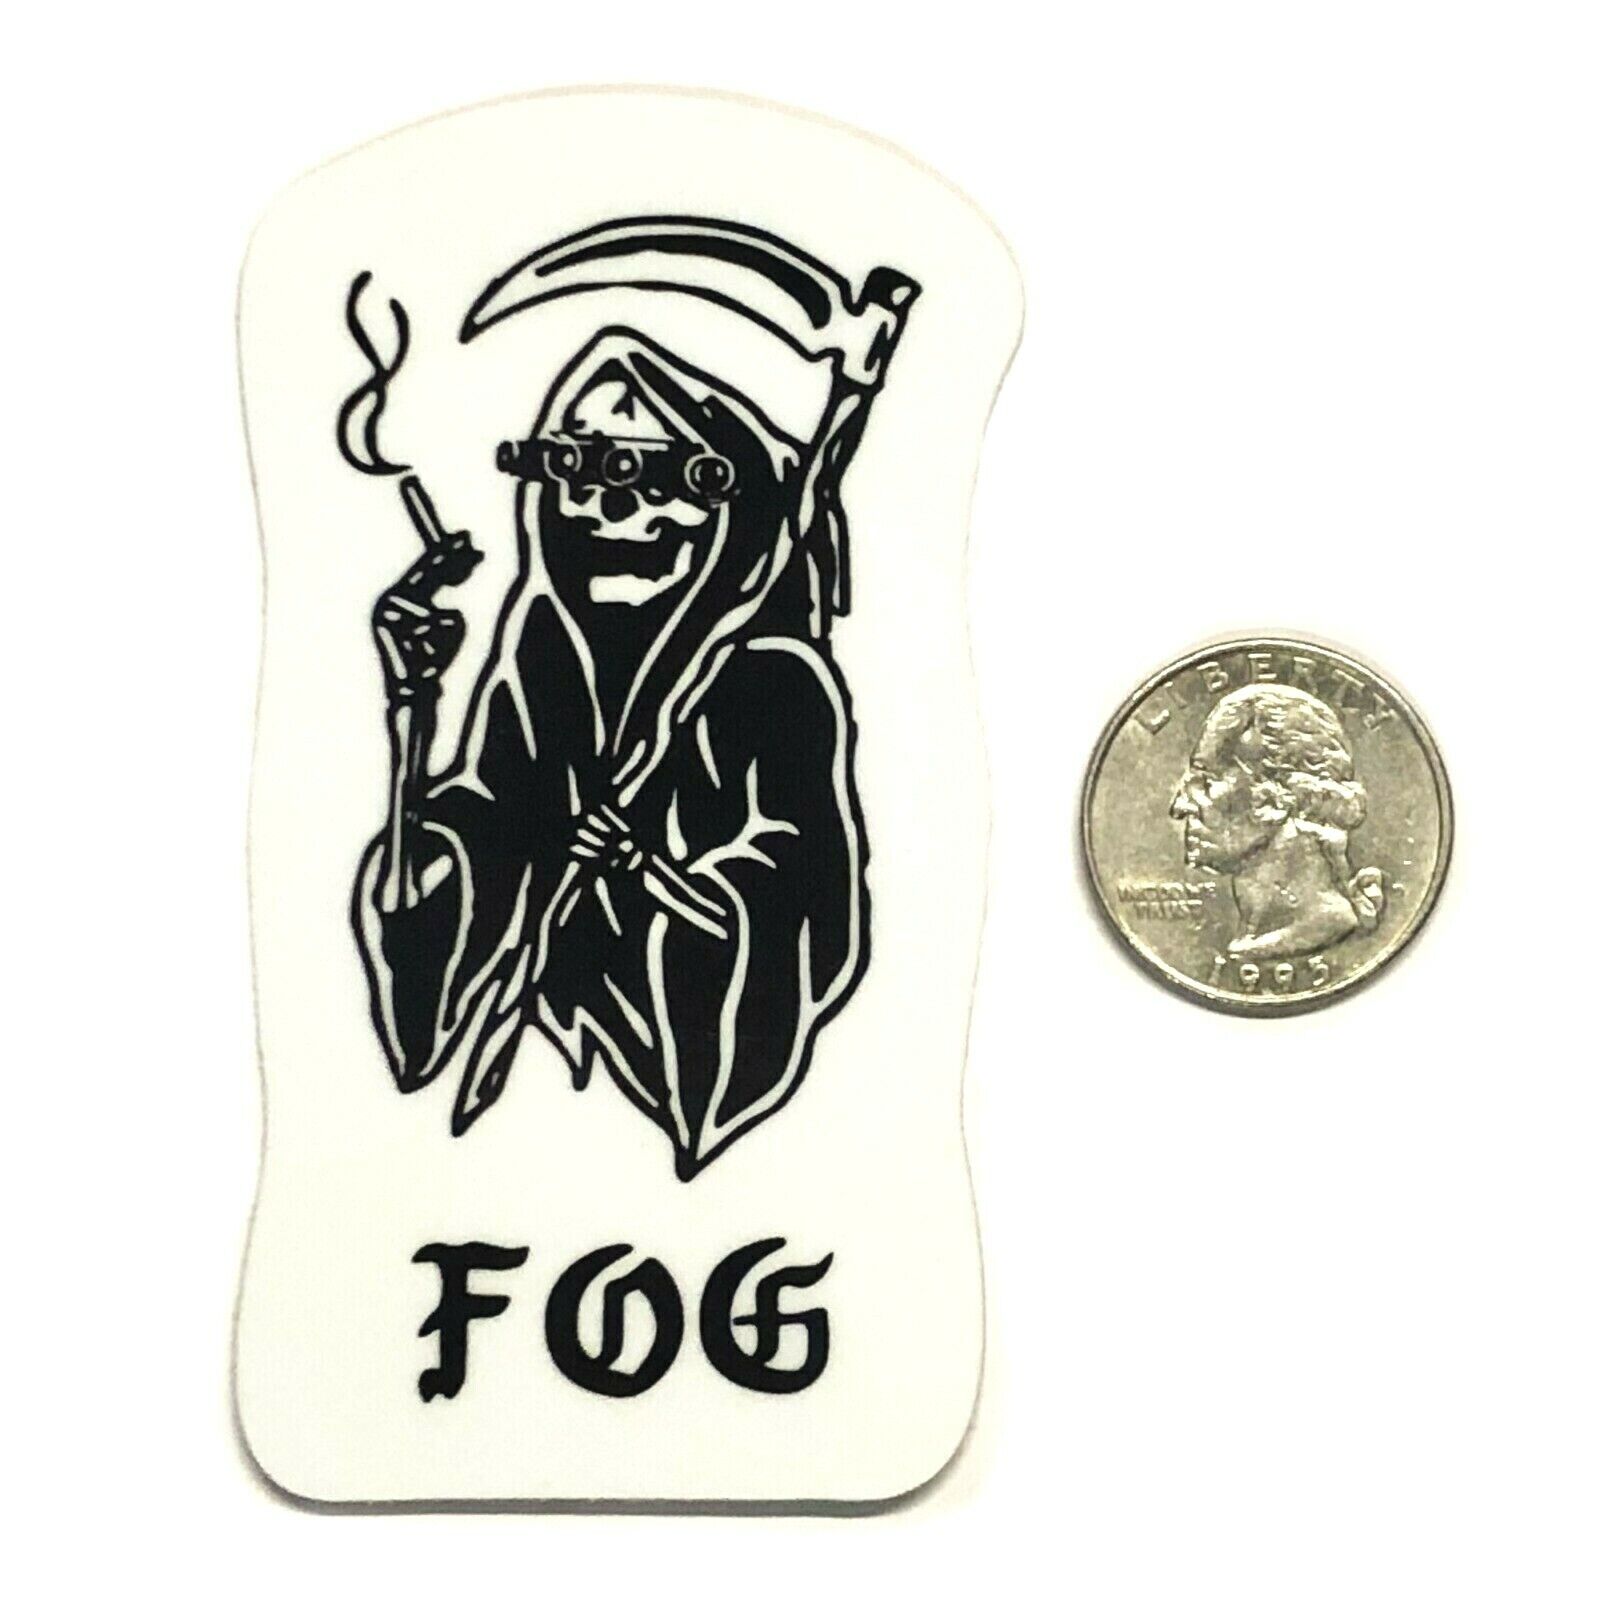 Forward Observations Group Small Smoking Reaper Sticker Superior Defense GBRS